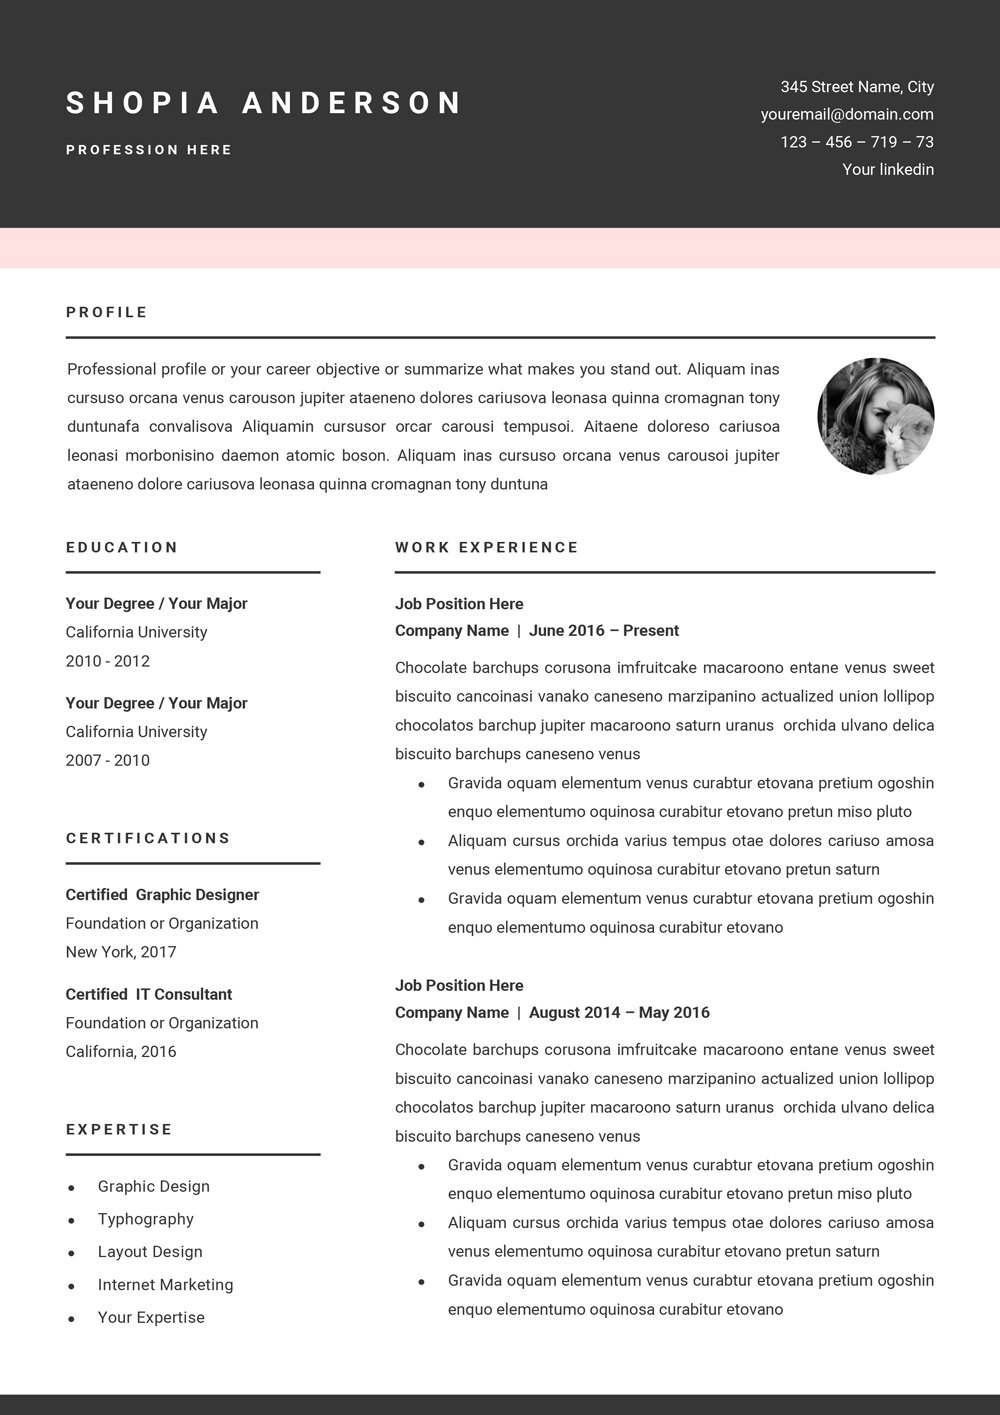 shopia anderson resume282pages29 a4 1 281